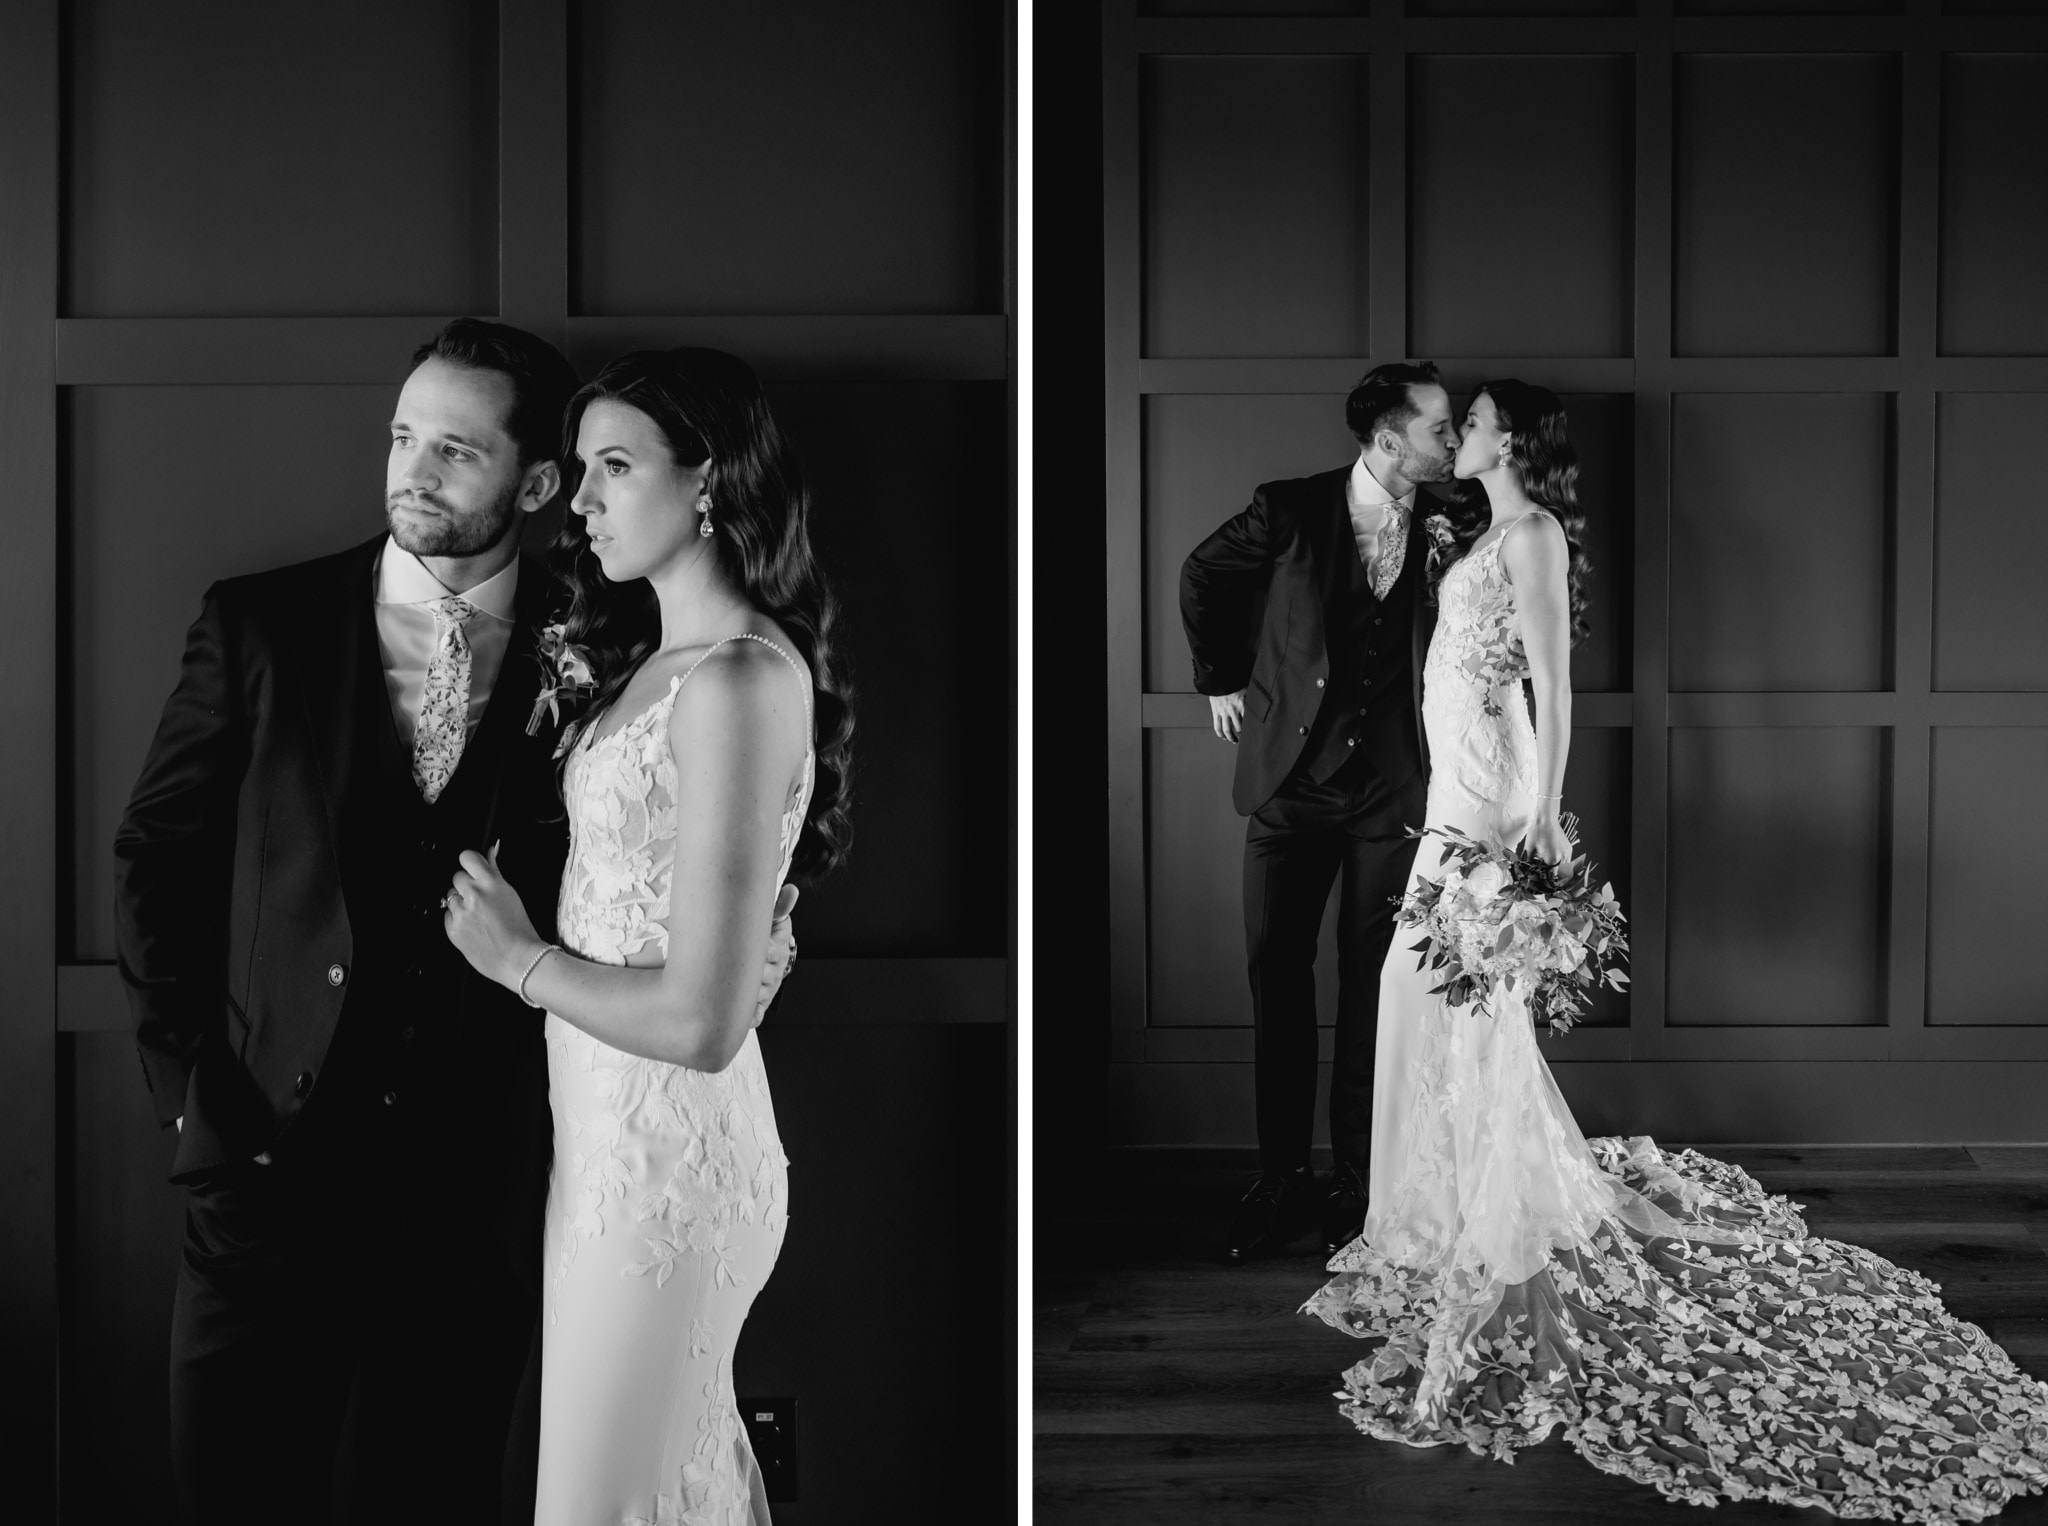 stunning black and white portraits of bride and groom